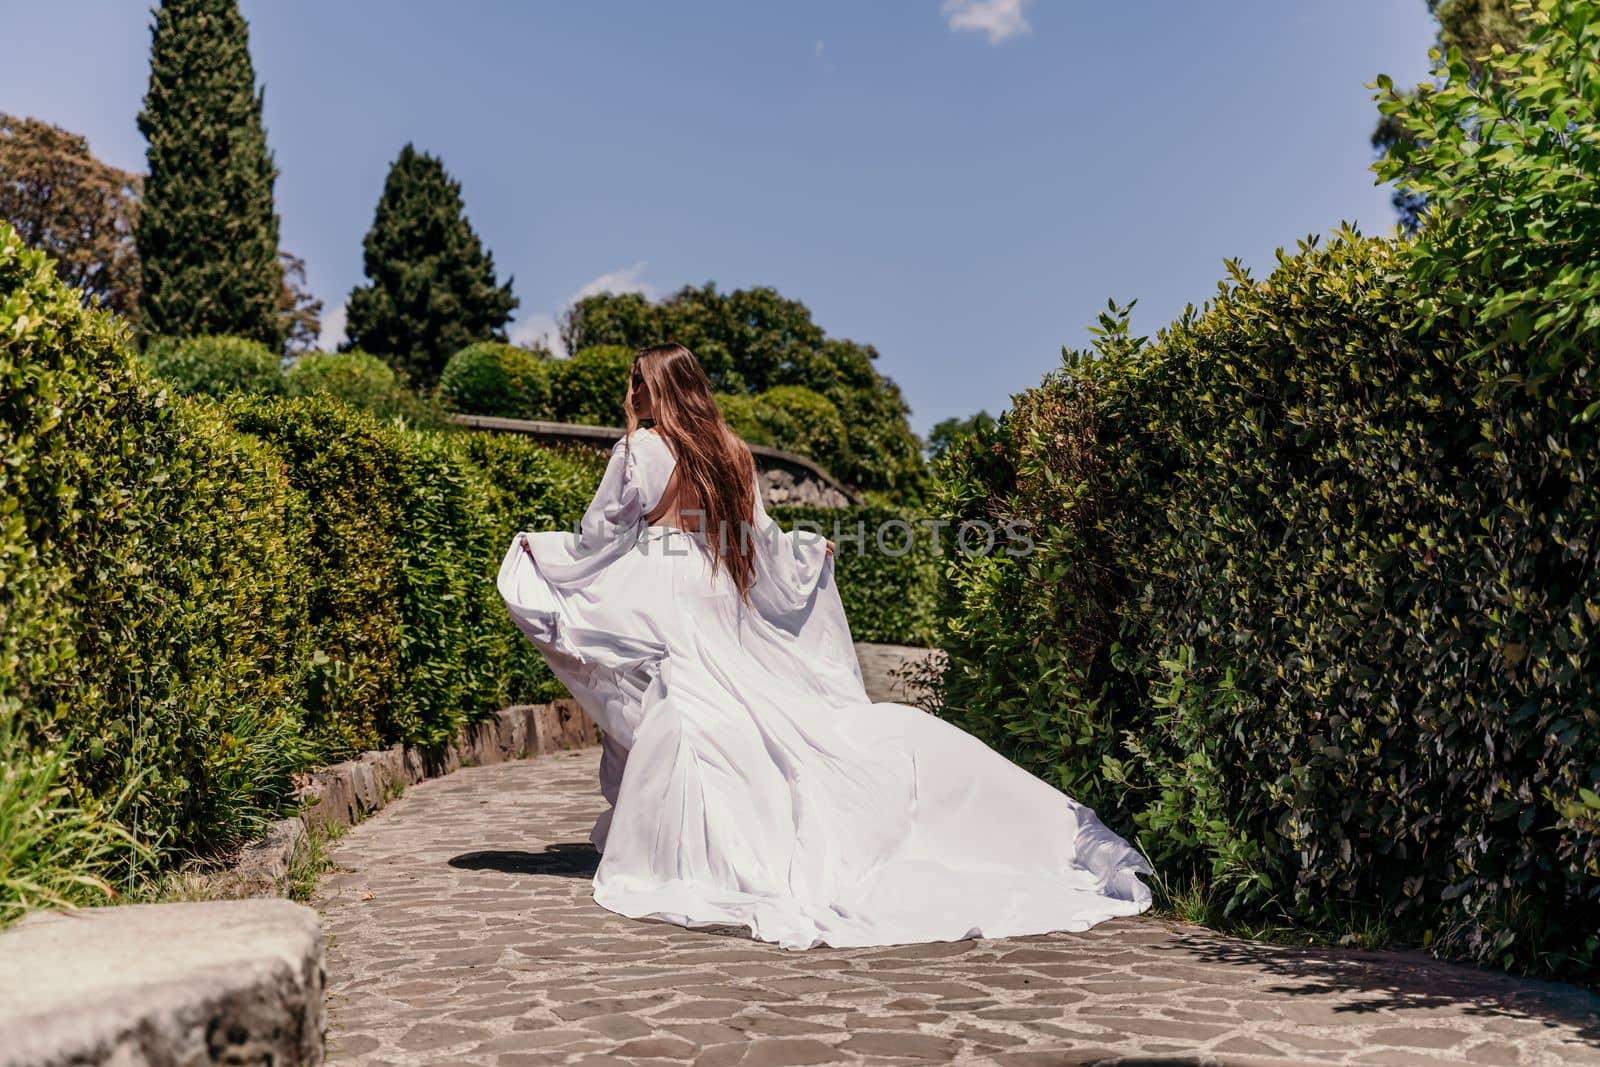 Brunette runs white dress park. A beautiful woman with long brown hair and a long white dress runs along the path along the beautiful bushes in the park, rear view.